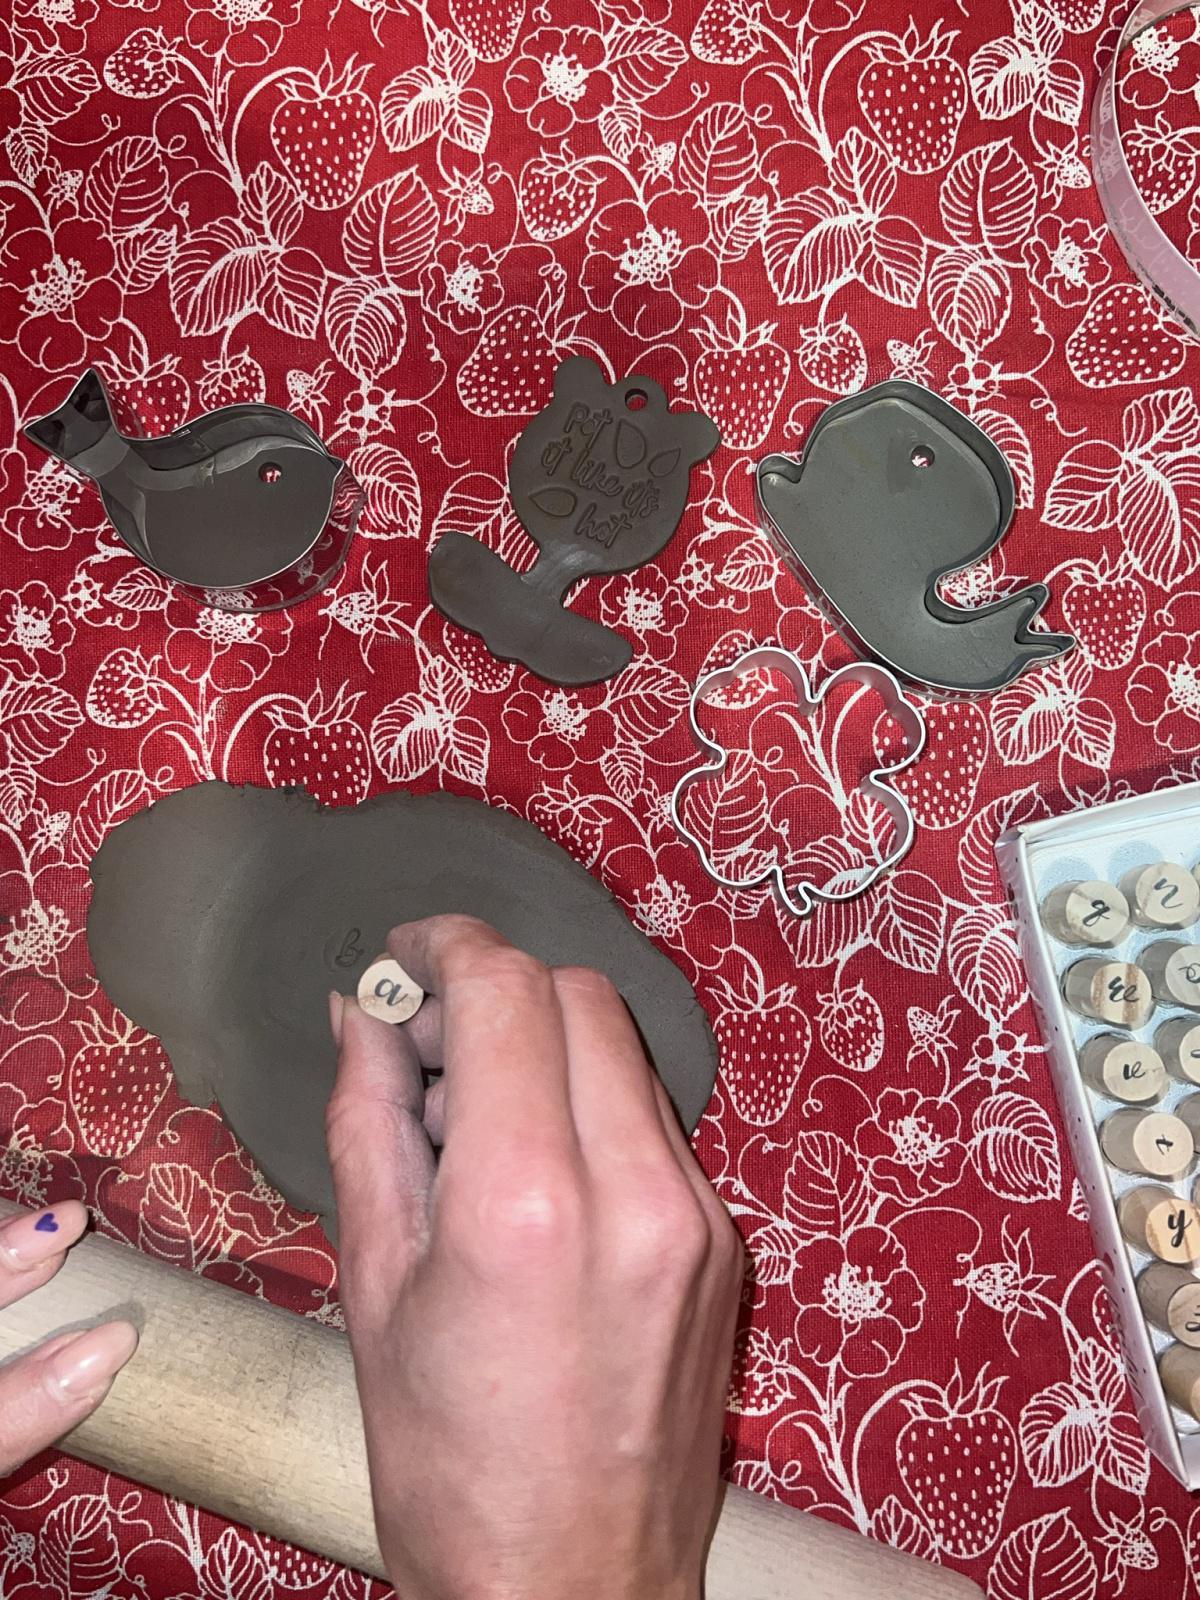 Mia’s Steps for Clay Art